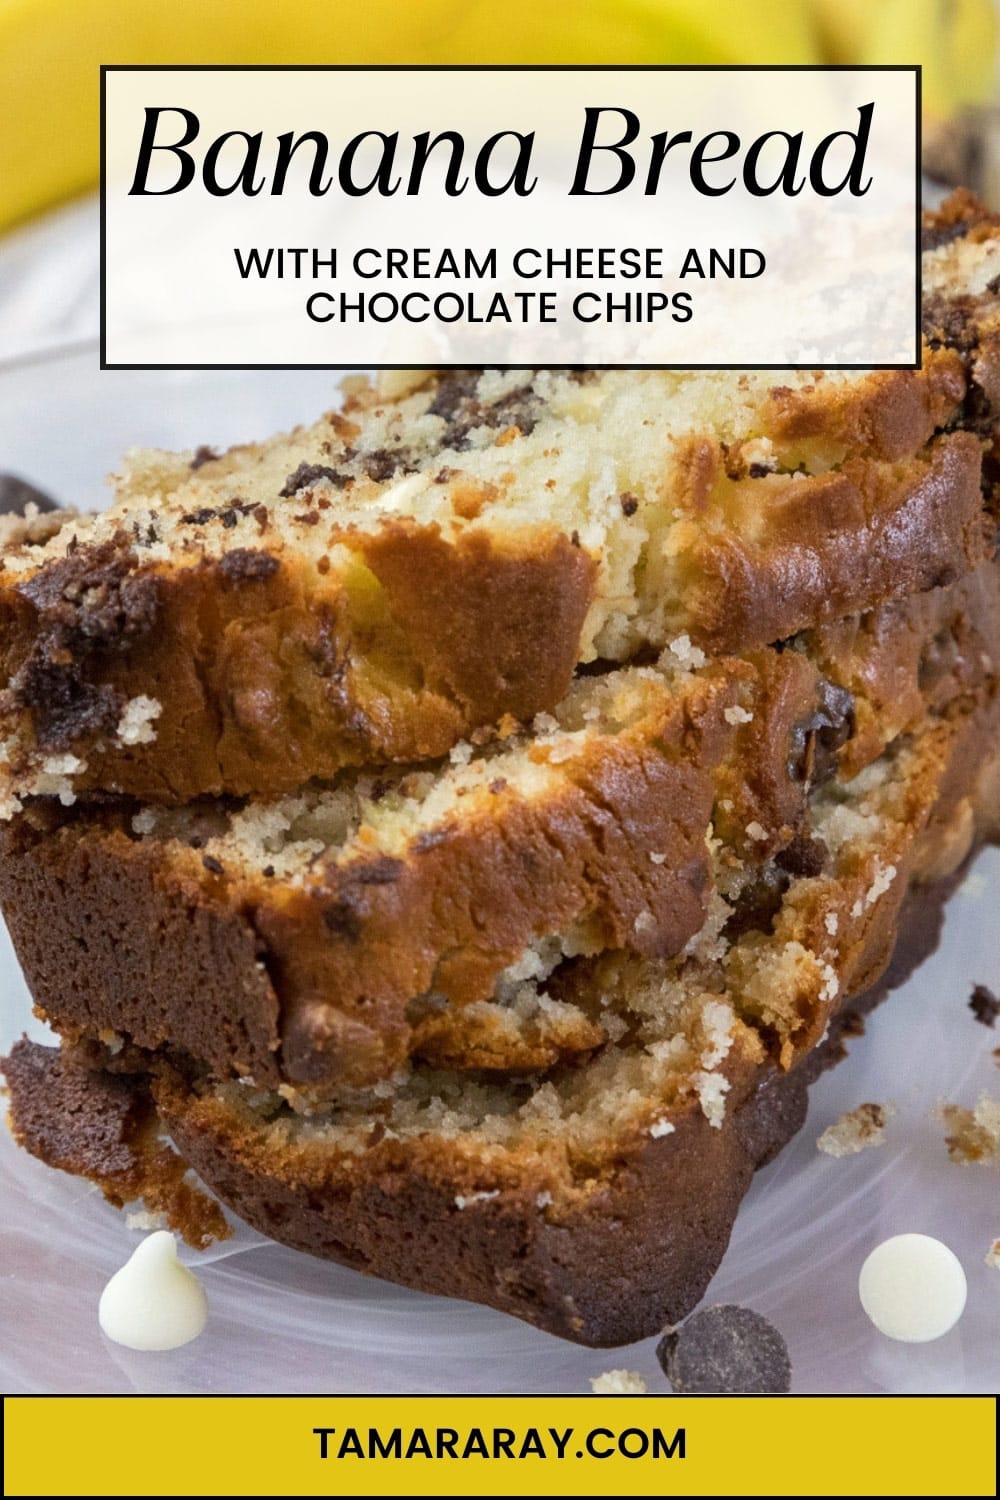 Photo of banana bread with cream cheese and chocolate chips for Pinterest .